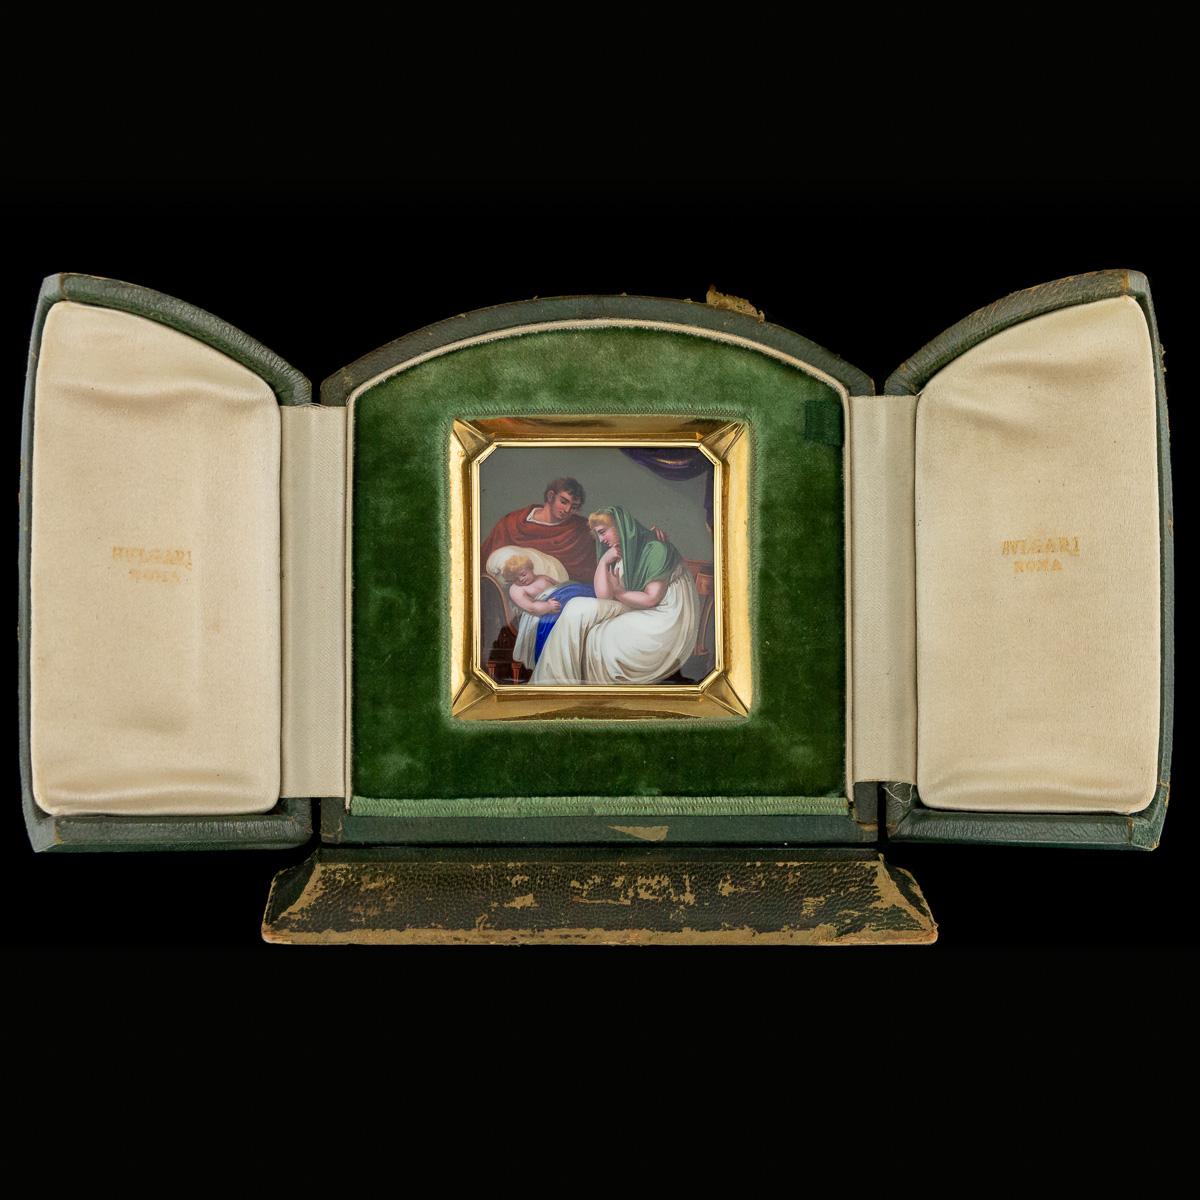 Antique early 19th century Swiss 18-karat gold and hand painted enamel plaque / icon, of square shape with cut corners, set in its original green leather bound traveling case, the plaque finely painted depicting baby Jesus with Mary and Joseph by